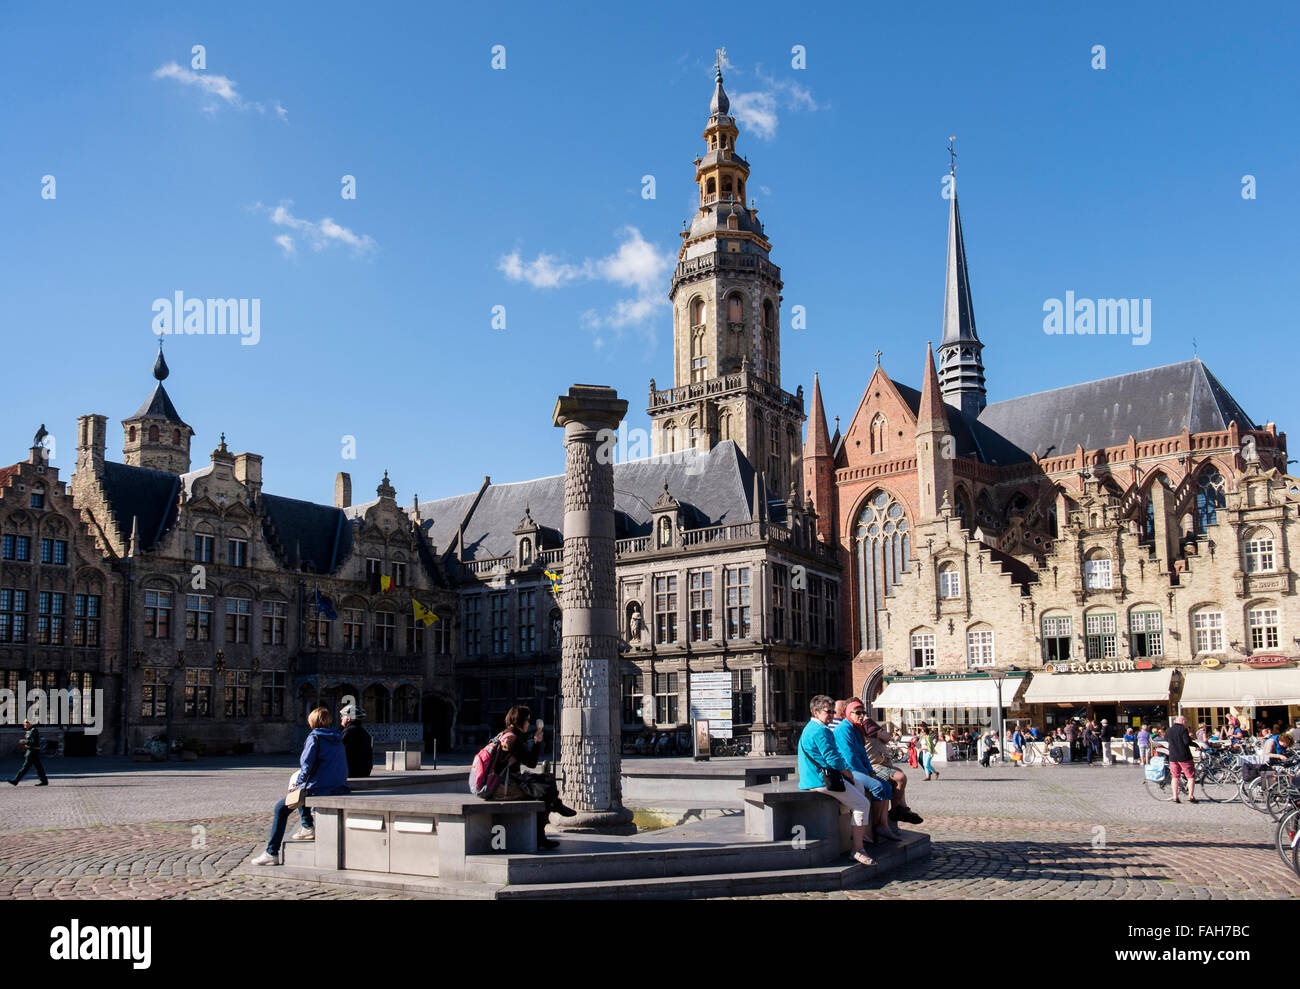 Tourist sitting by fountain in market square with Old Courthouse (Landhuis) and belfry. Grote Markt Veurne West Flanders Belgium Stock Photo